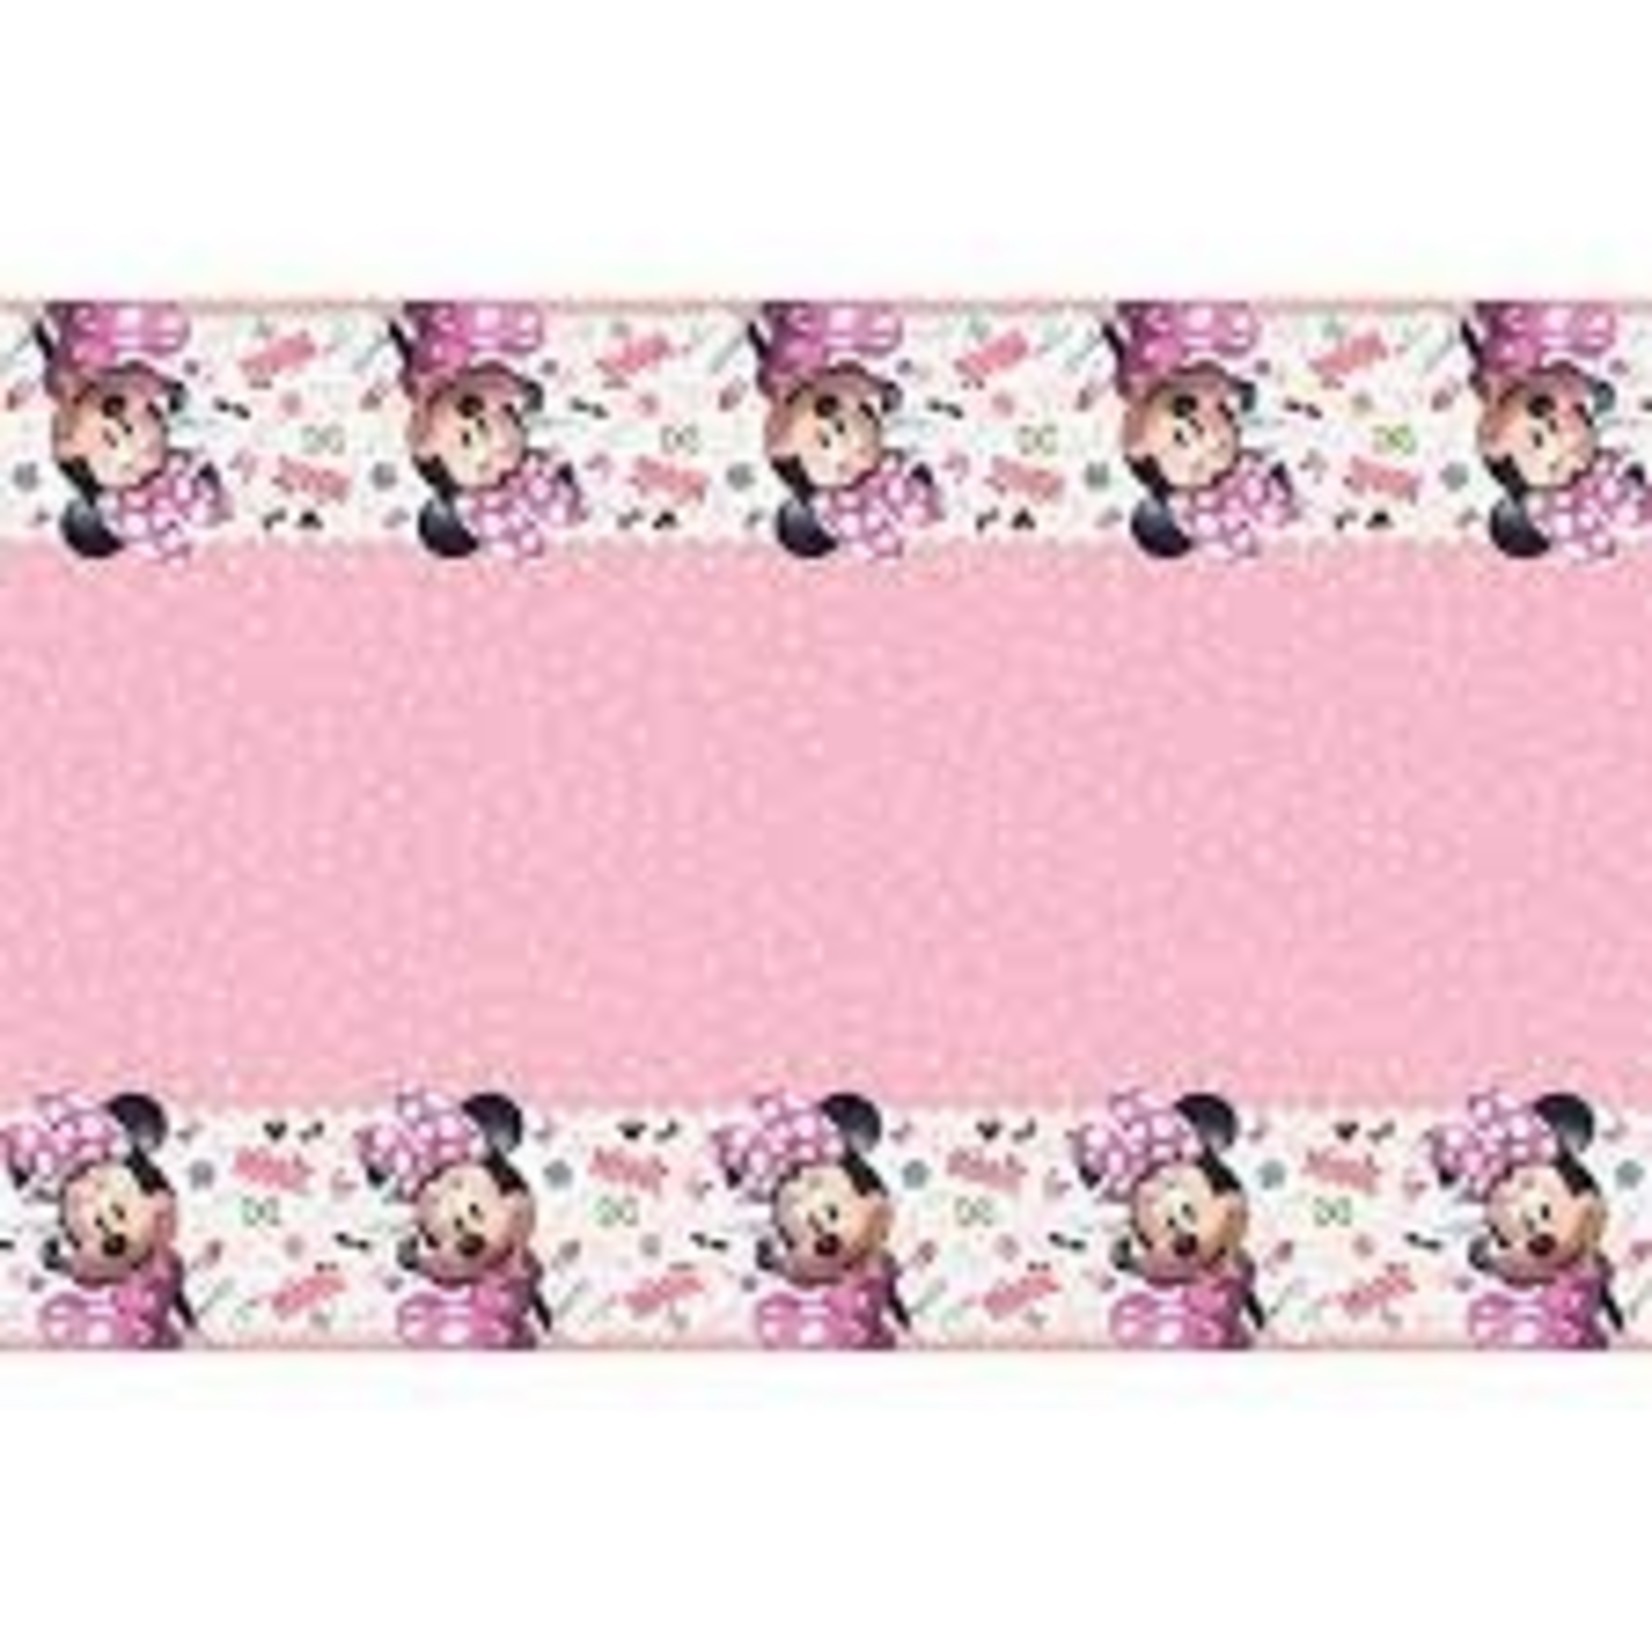 Minnie Mouse Tablecover